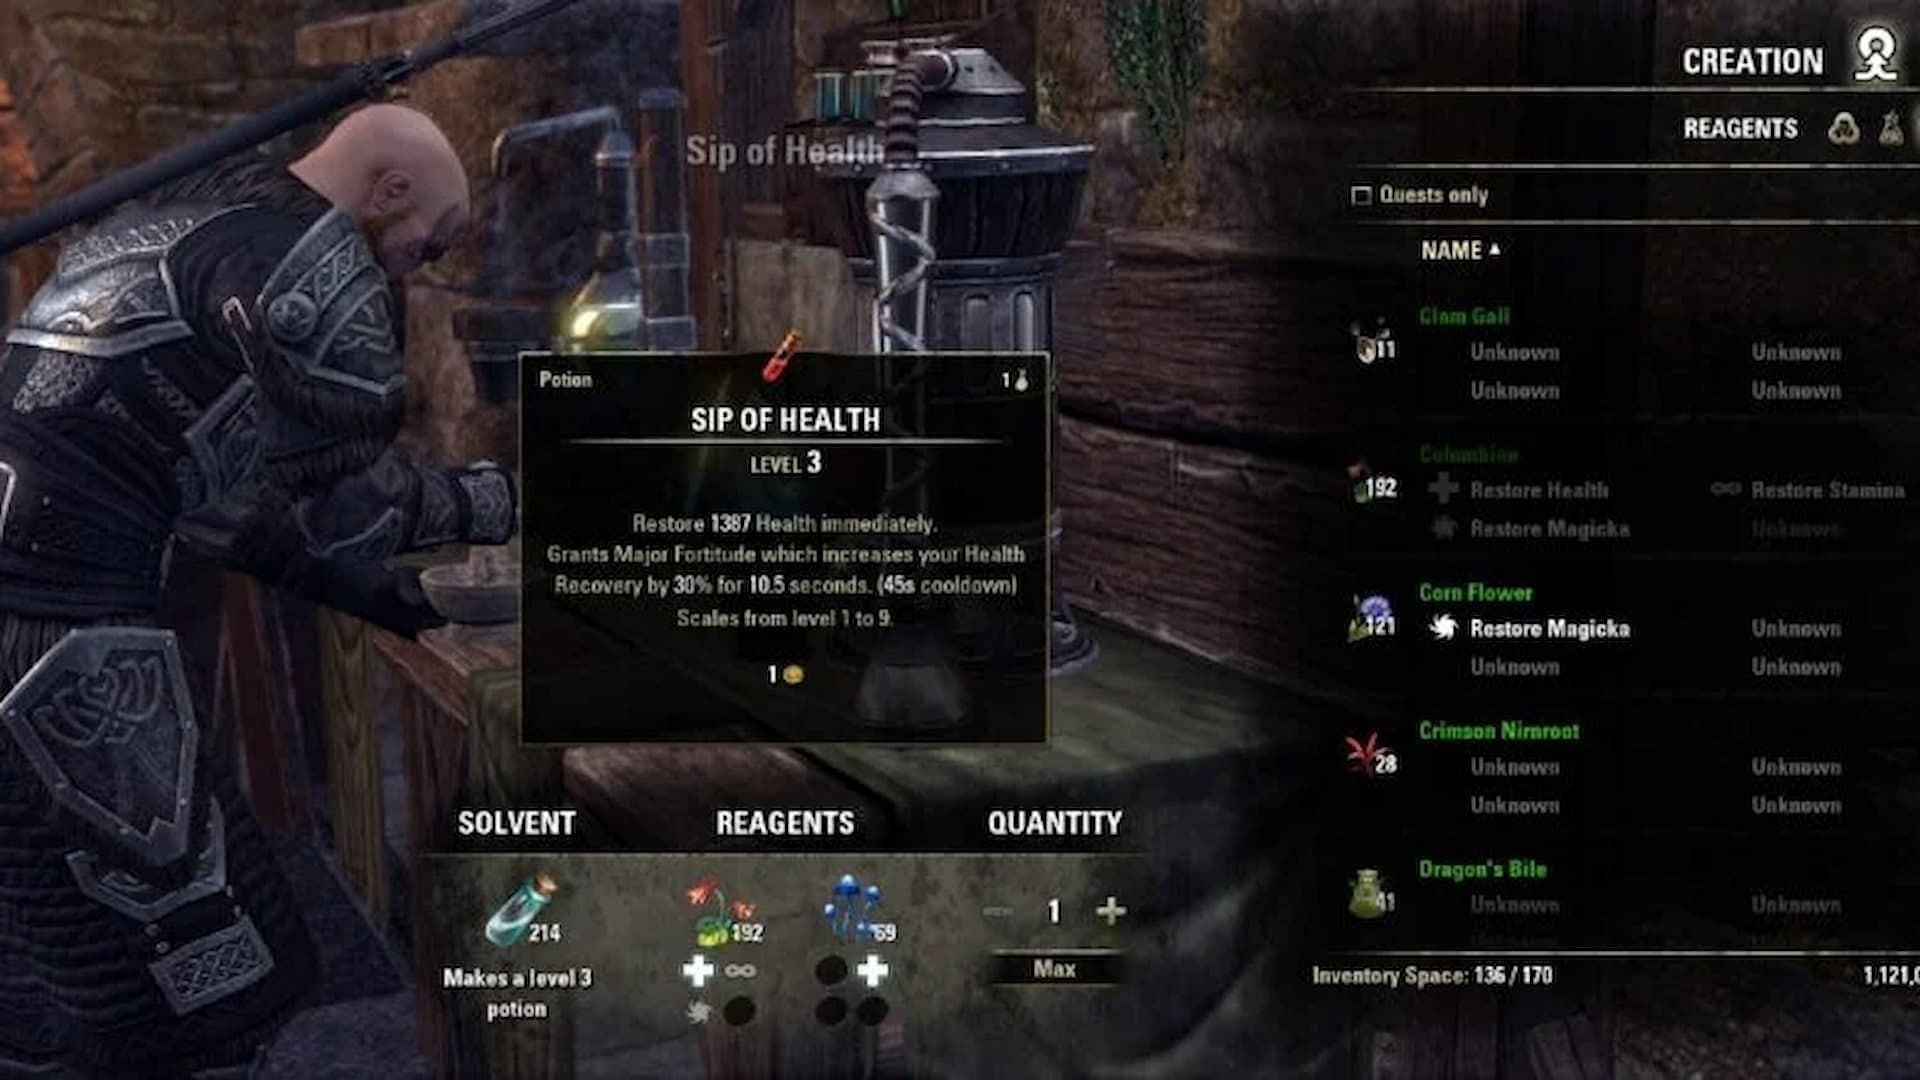 Potions can be crafted at the Alchemy station in The Elder Scrolls Online (Image via ZeniMax Online Studios)